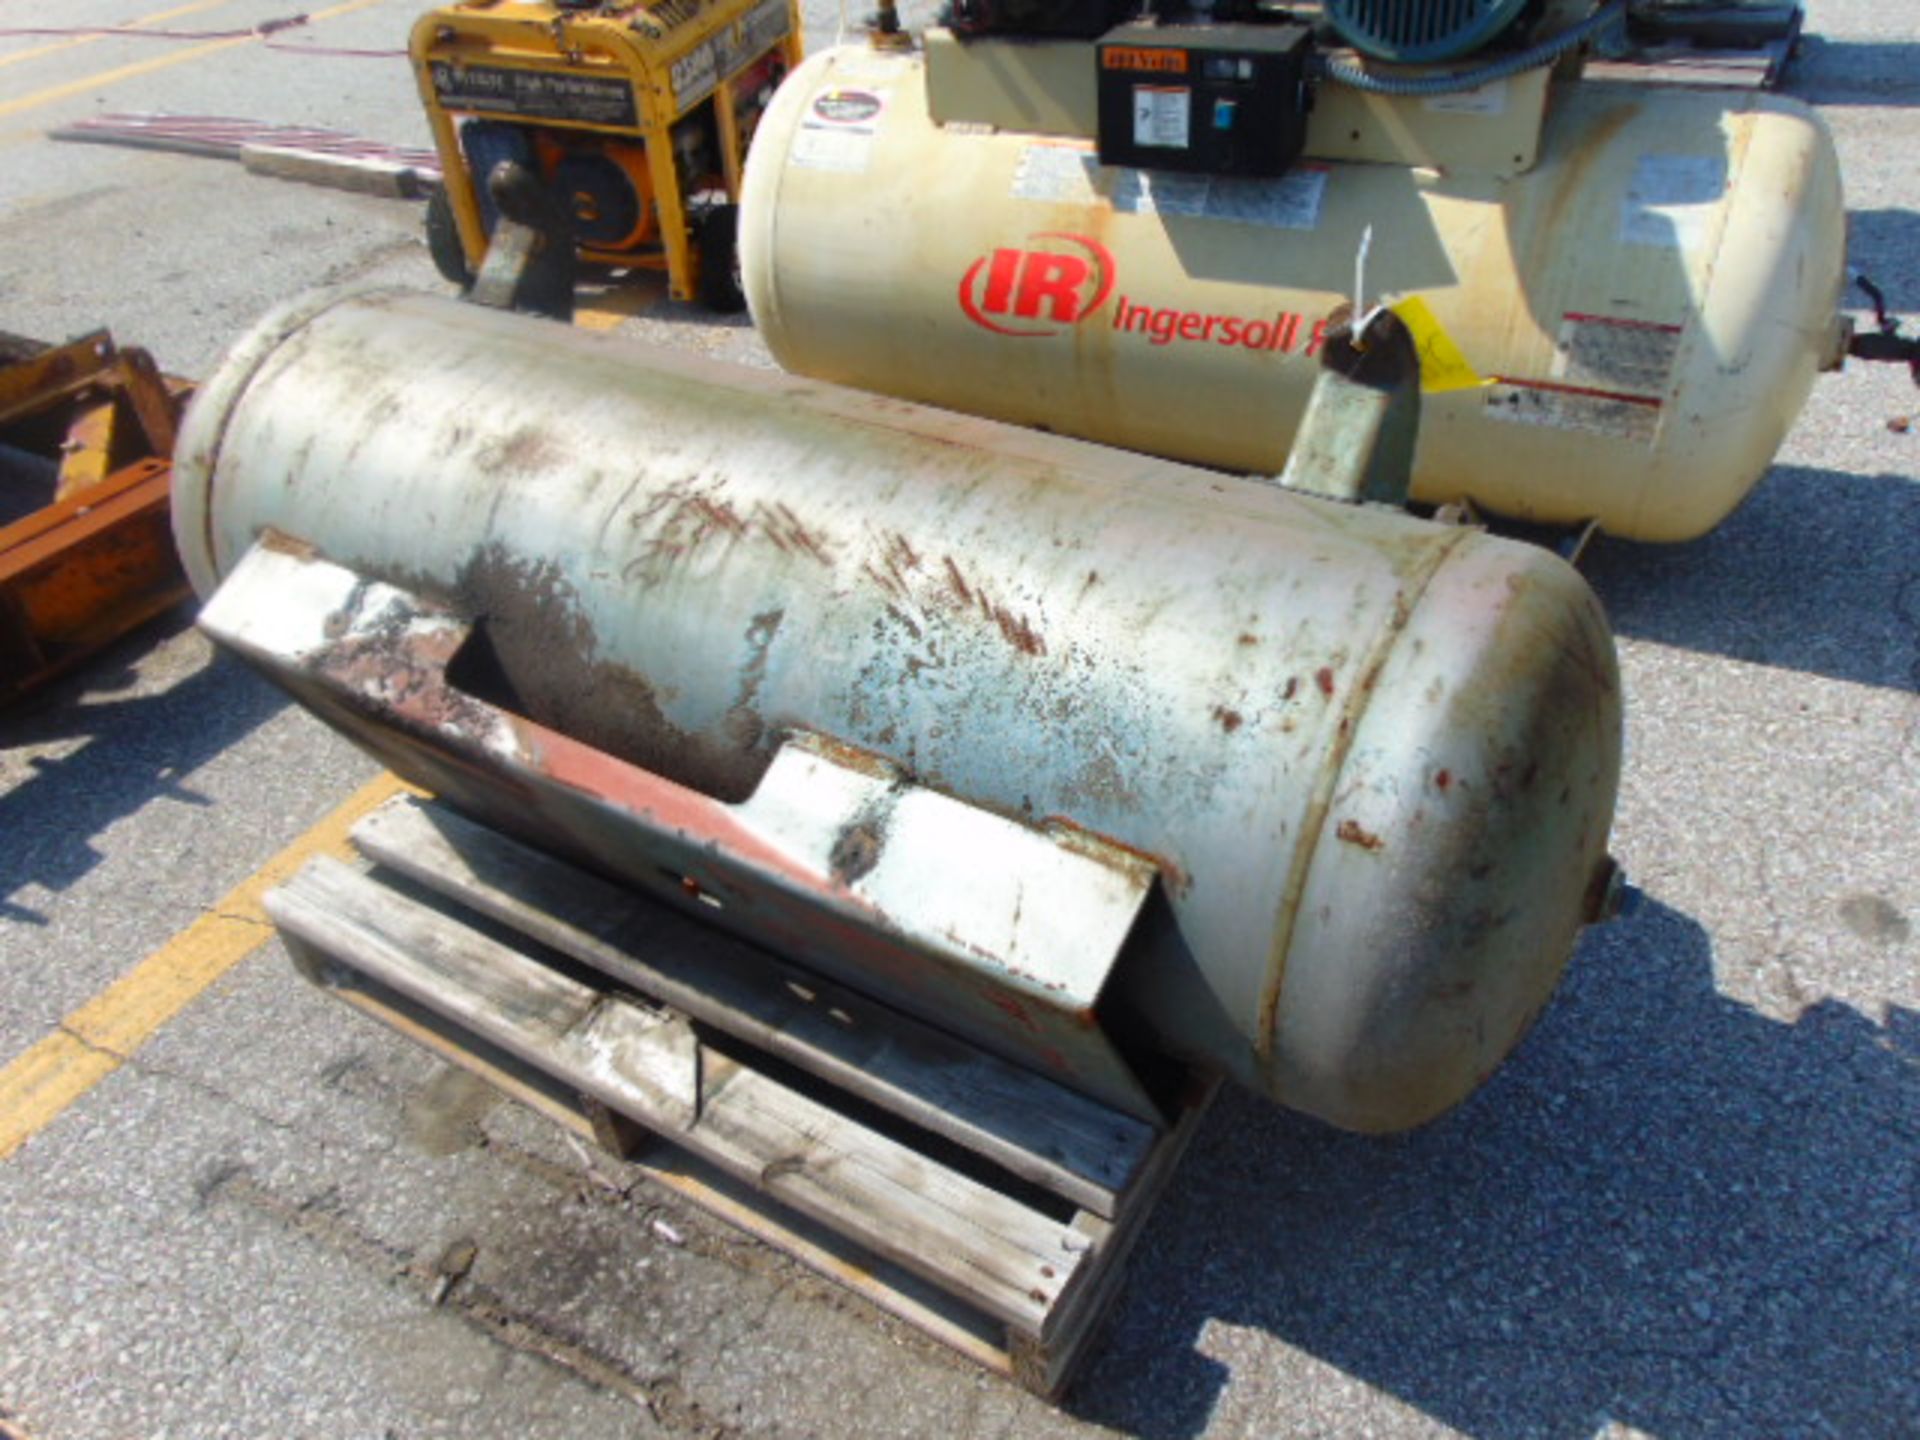 HORIZONTAL AIR COMPRESSOR, INGERSOLL RAND, 10 HP, w/extra tank - Image 2 of 2